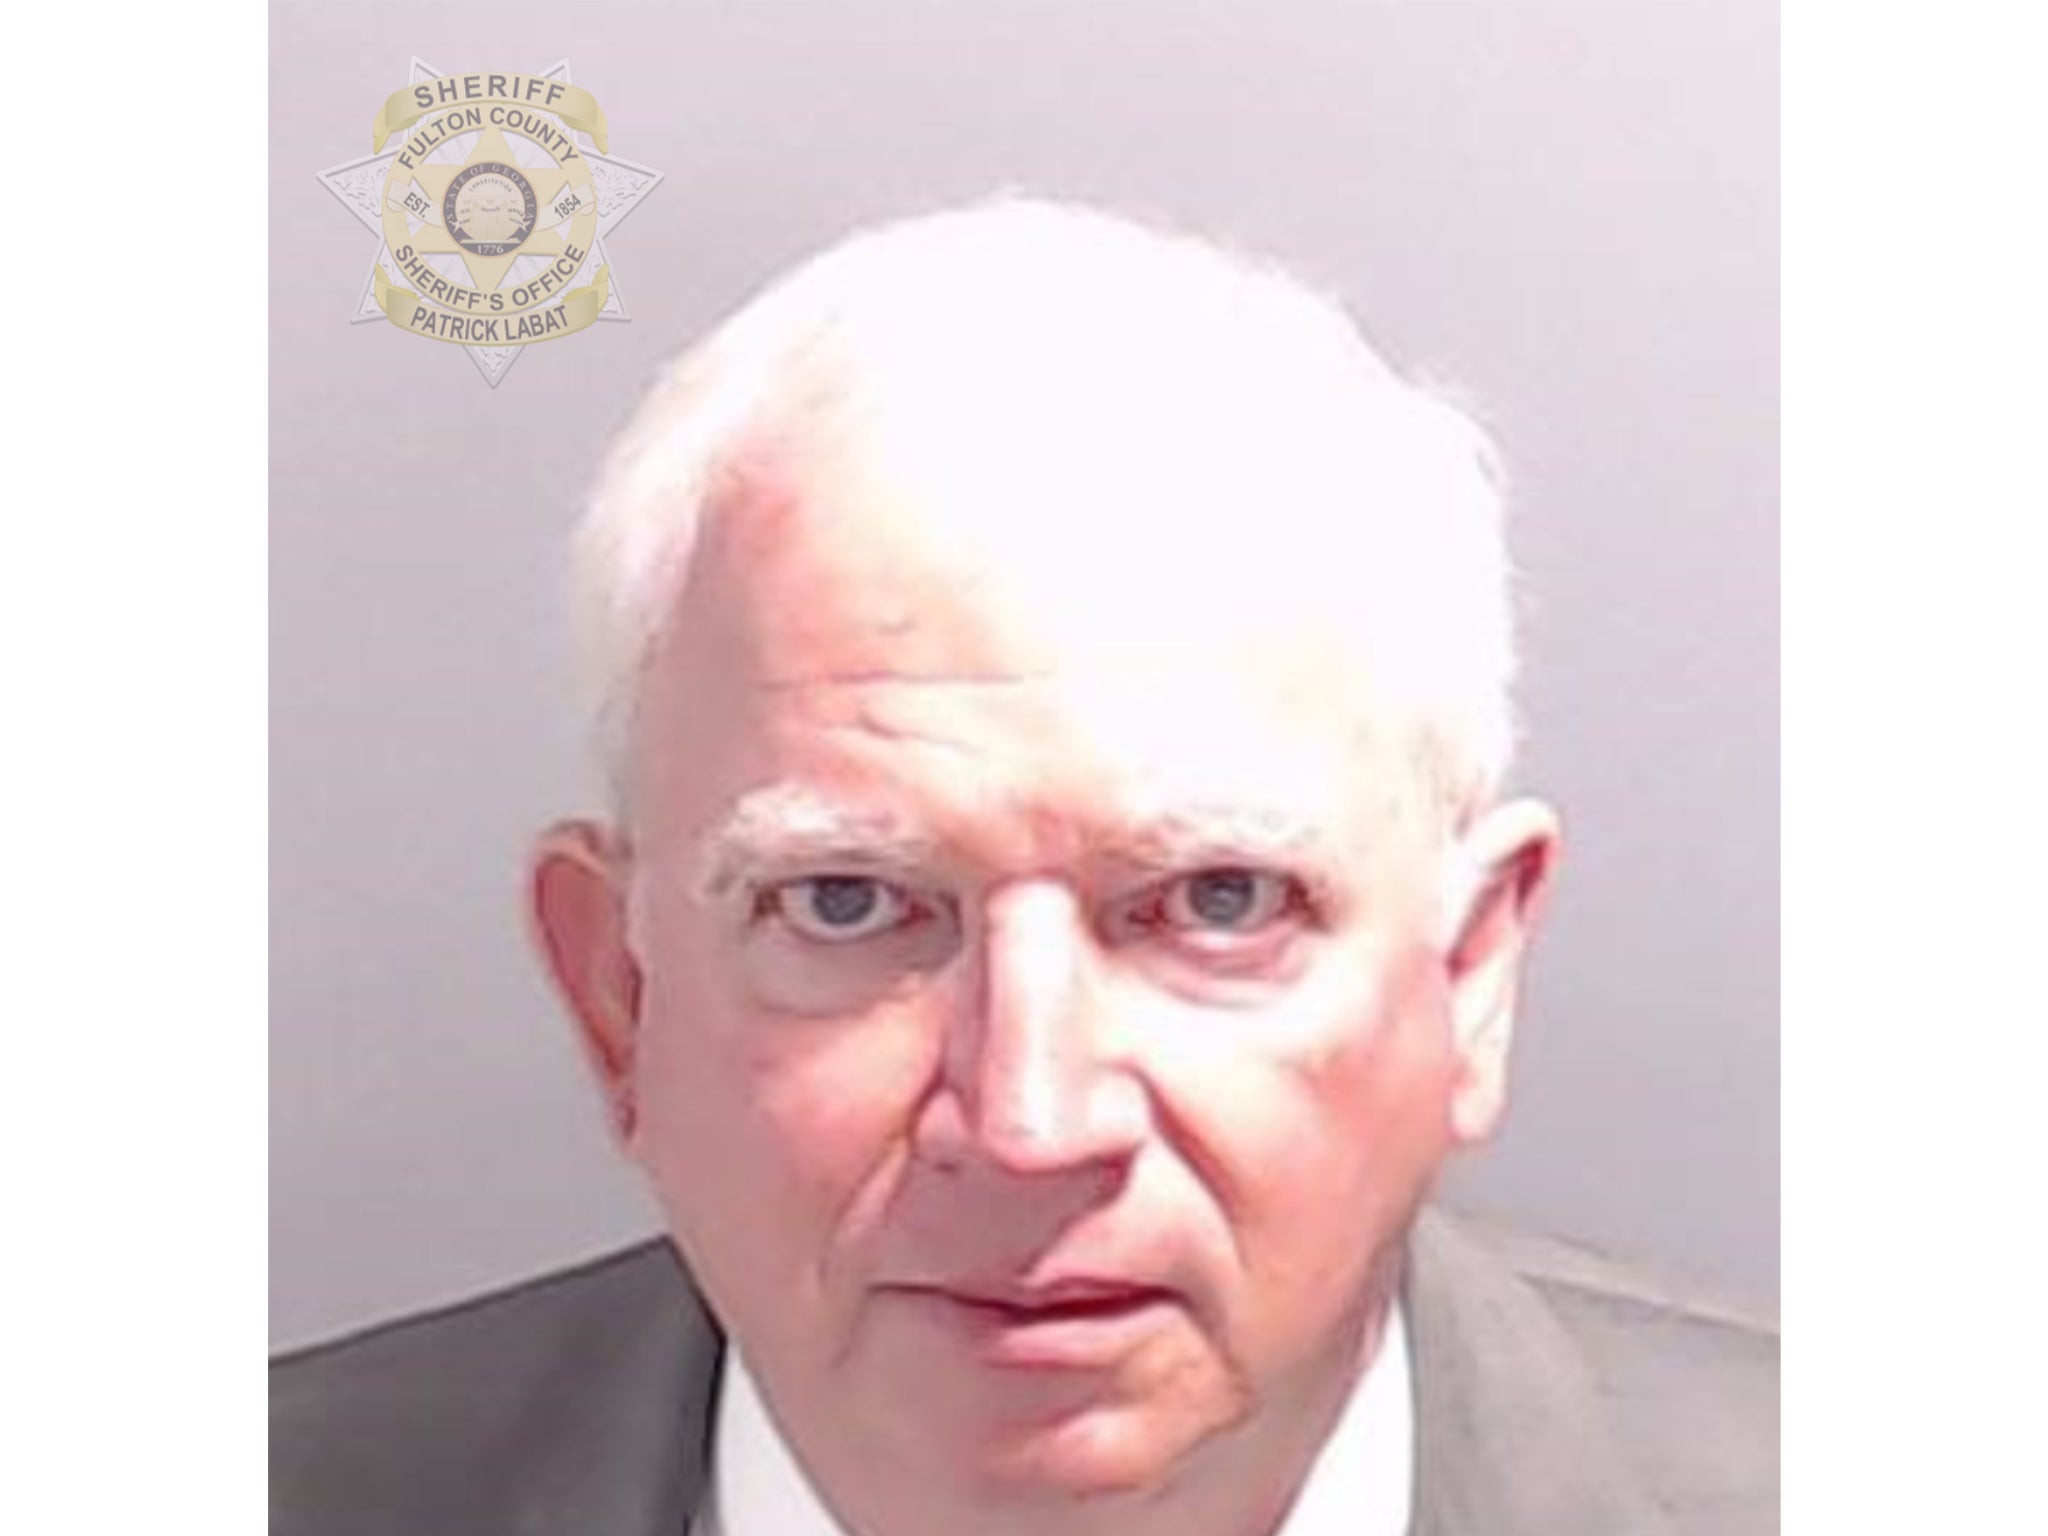 John Eastman’s mug shot after surrendering to authorities in Fulton County, Georgia last month